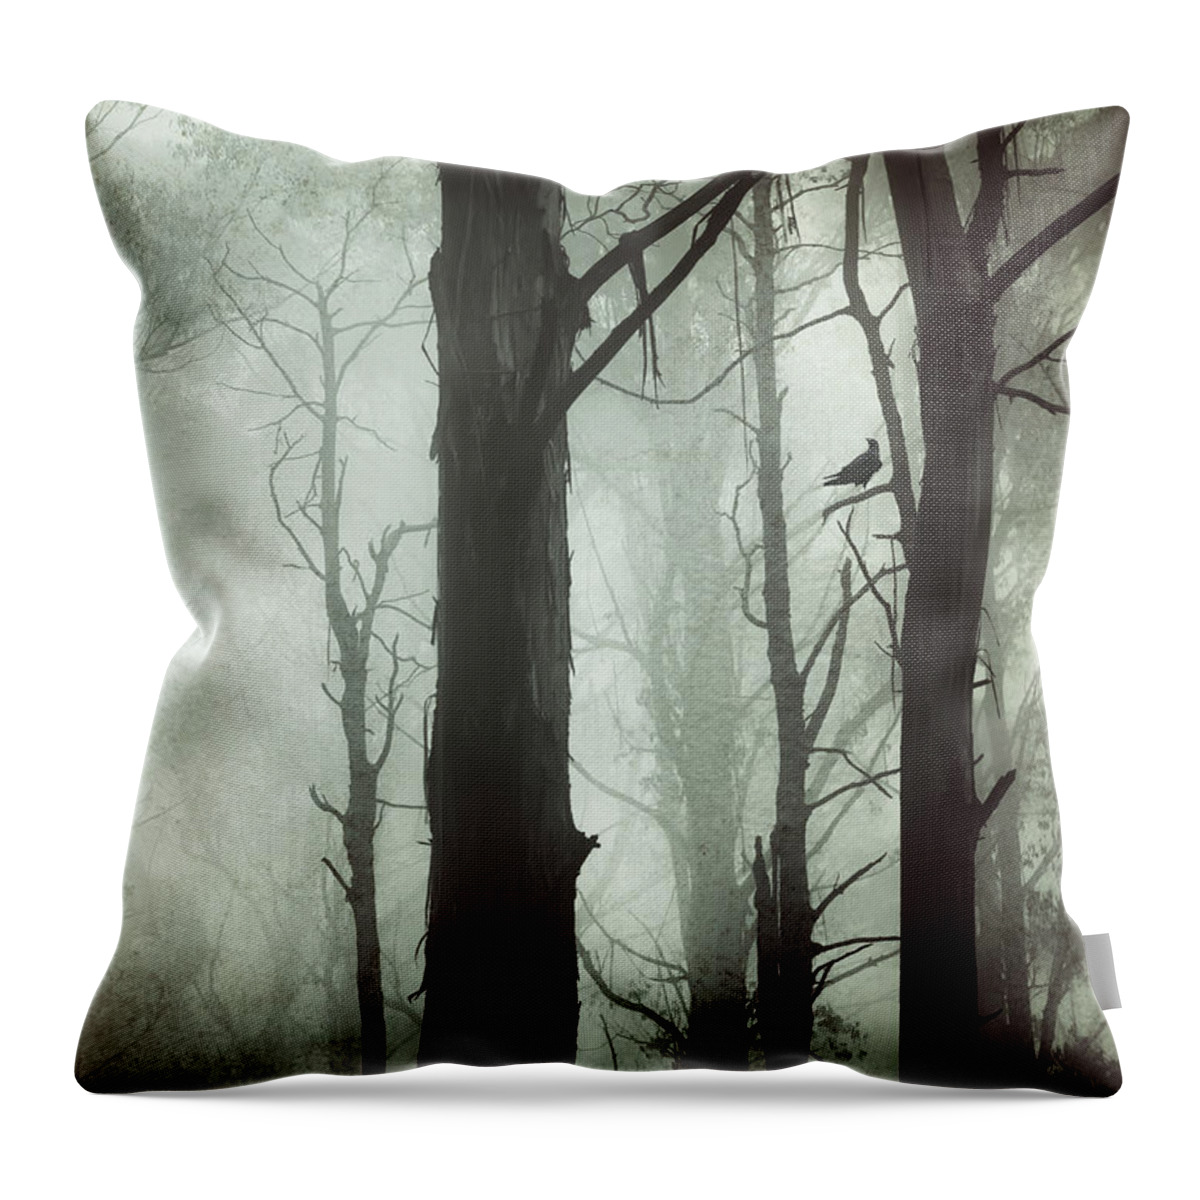 Fog Throw Pillow featuring the photograph Solitude by Amy Weiss